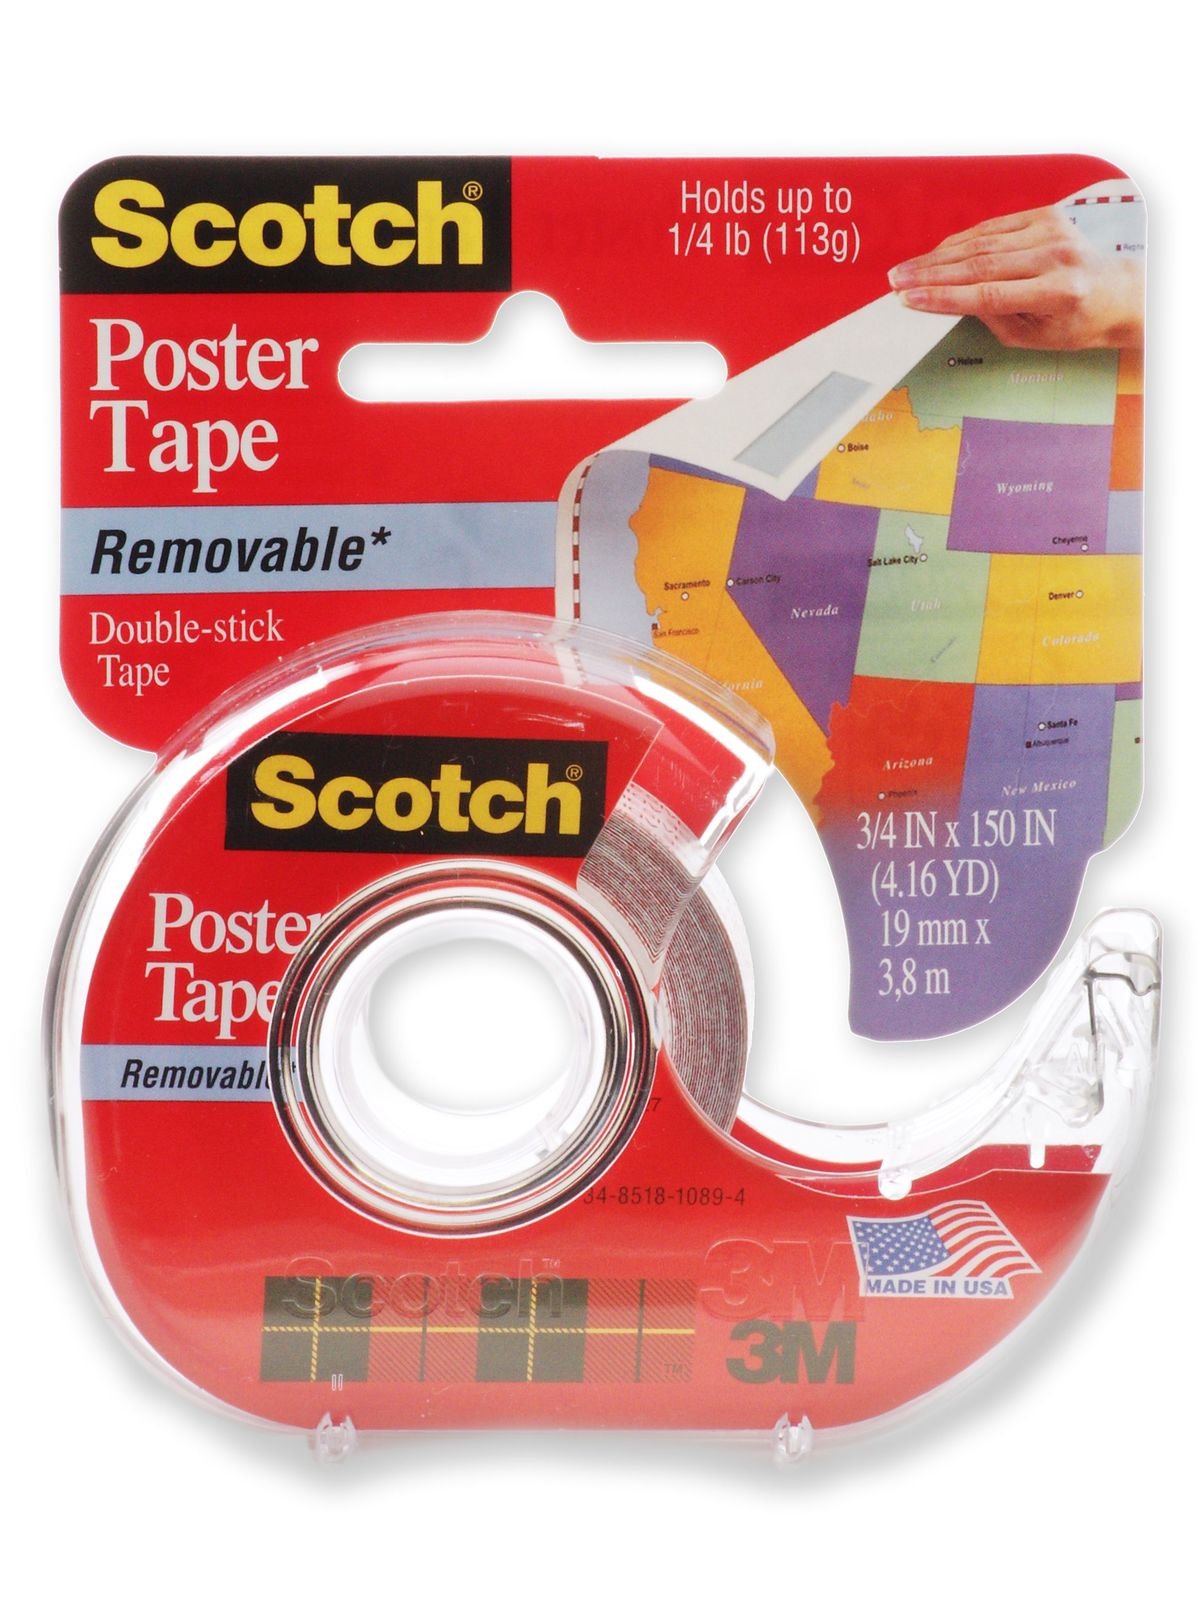 3M - Scotch Poster Tape Removable